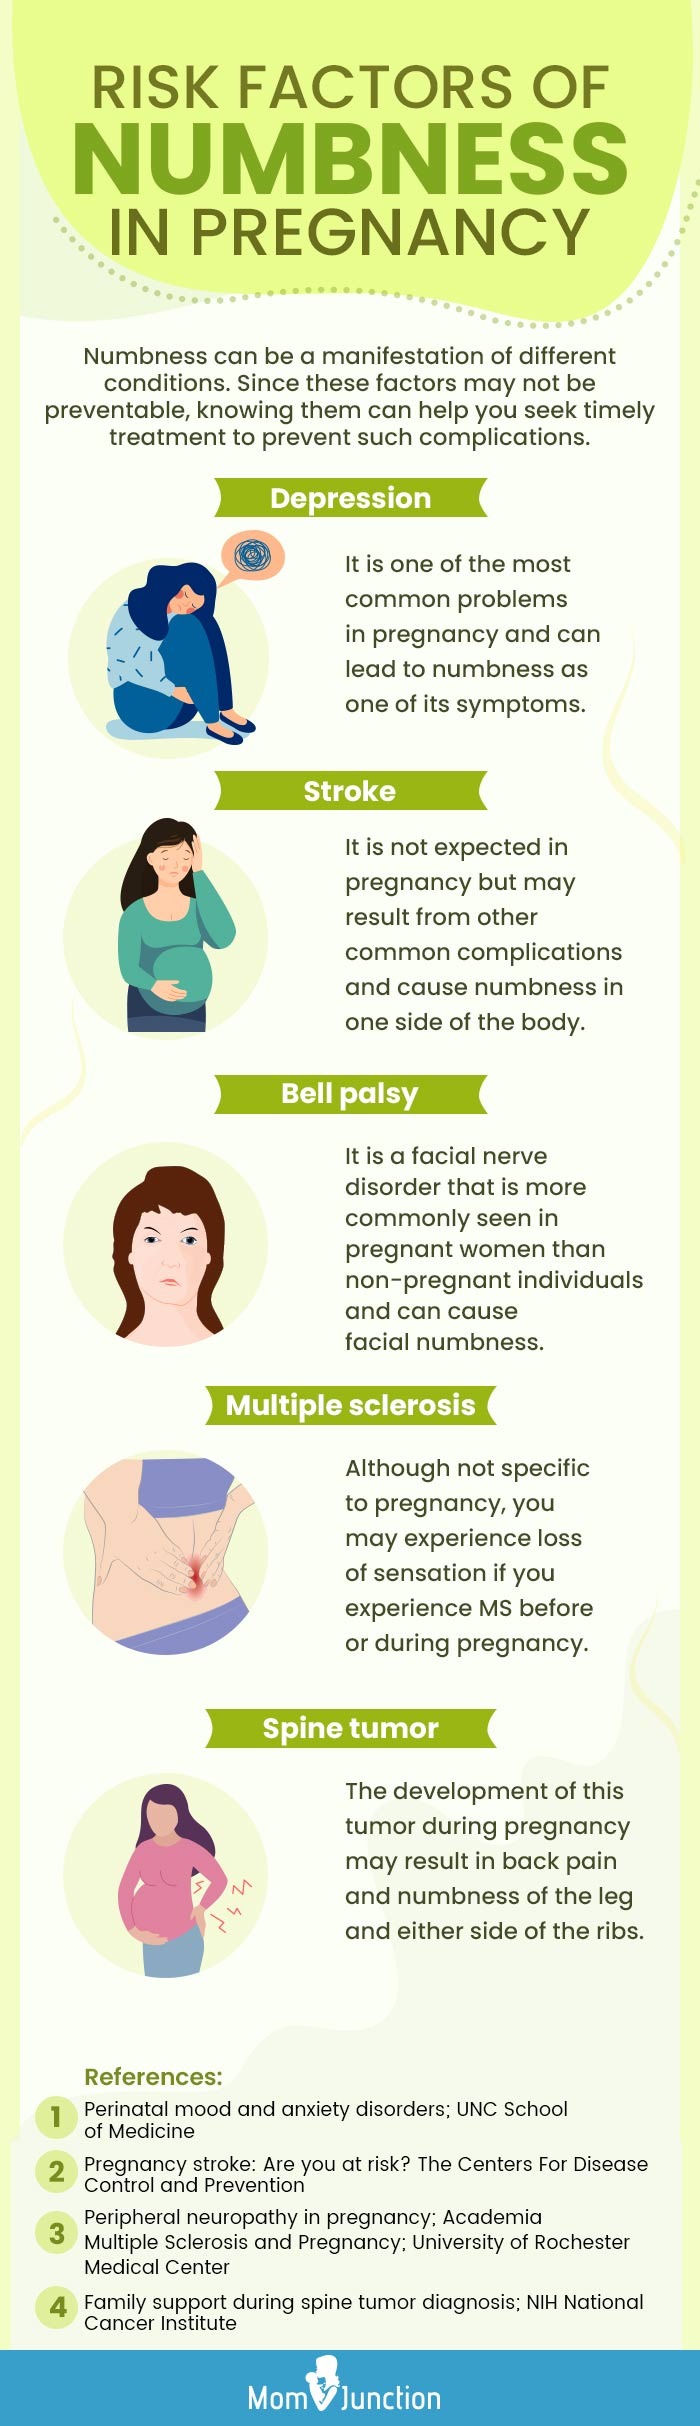 risk factors of numbness in pregnancy [infographic]